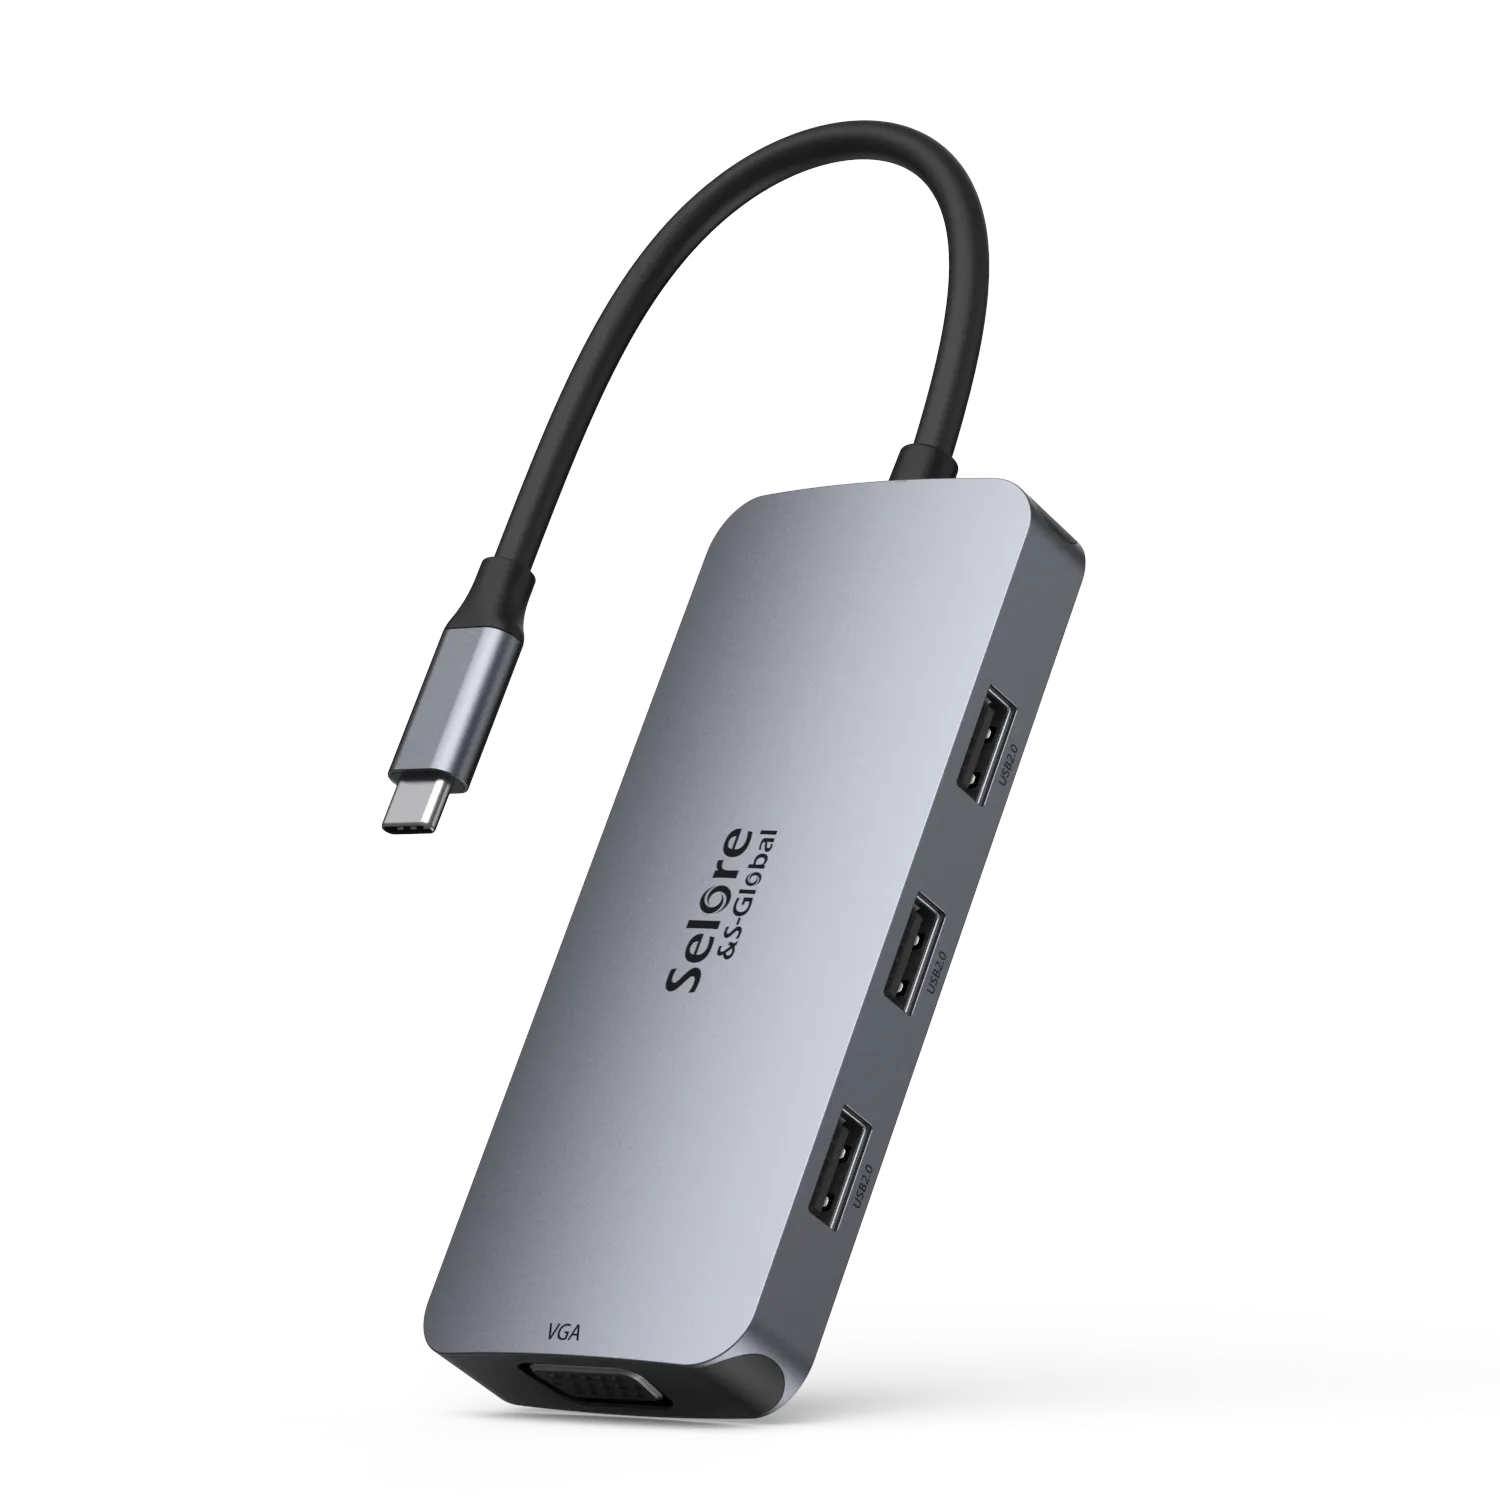 Anker USB-C to HDMI Adapter for sale online